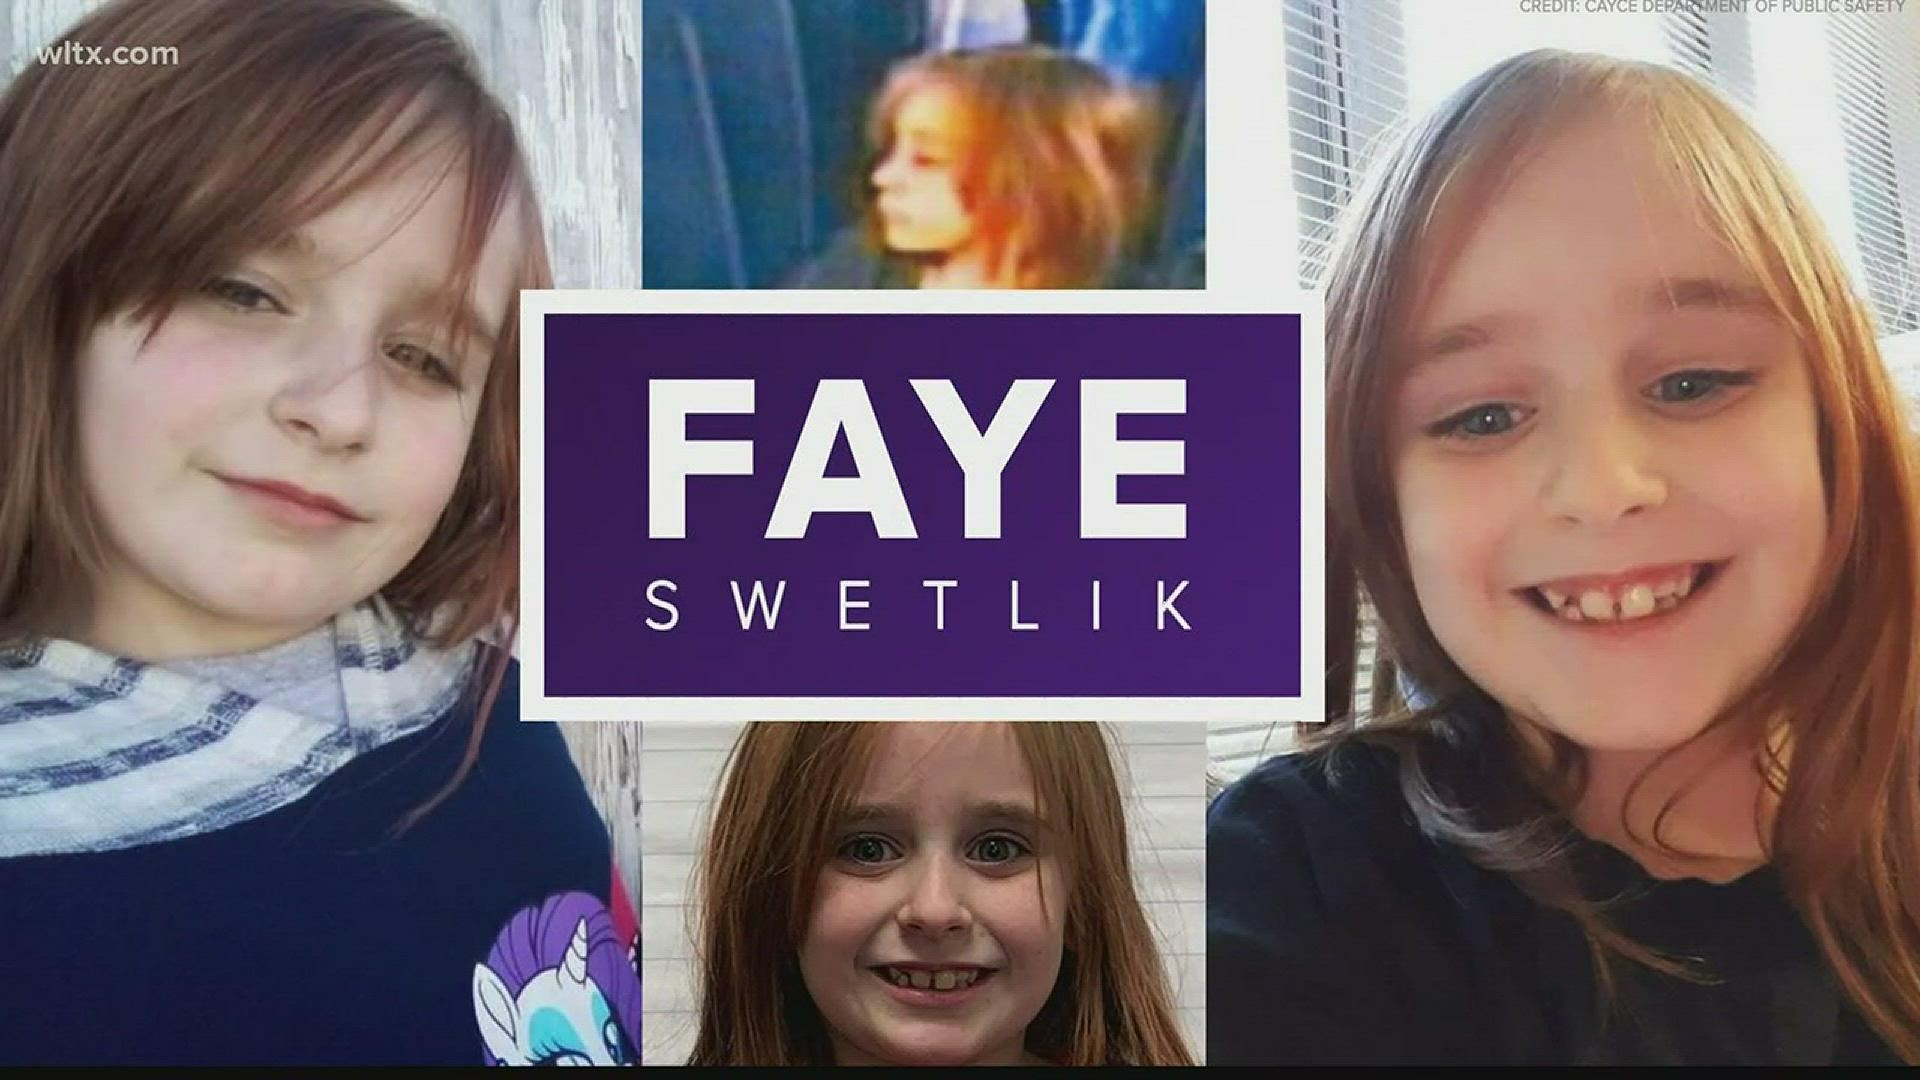 Faye Swetlik, the 6-year-old girl who was missing for days, was found dead in her Cayce neighborhood on Thursday.